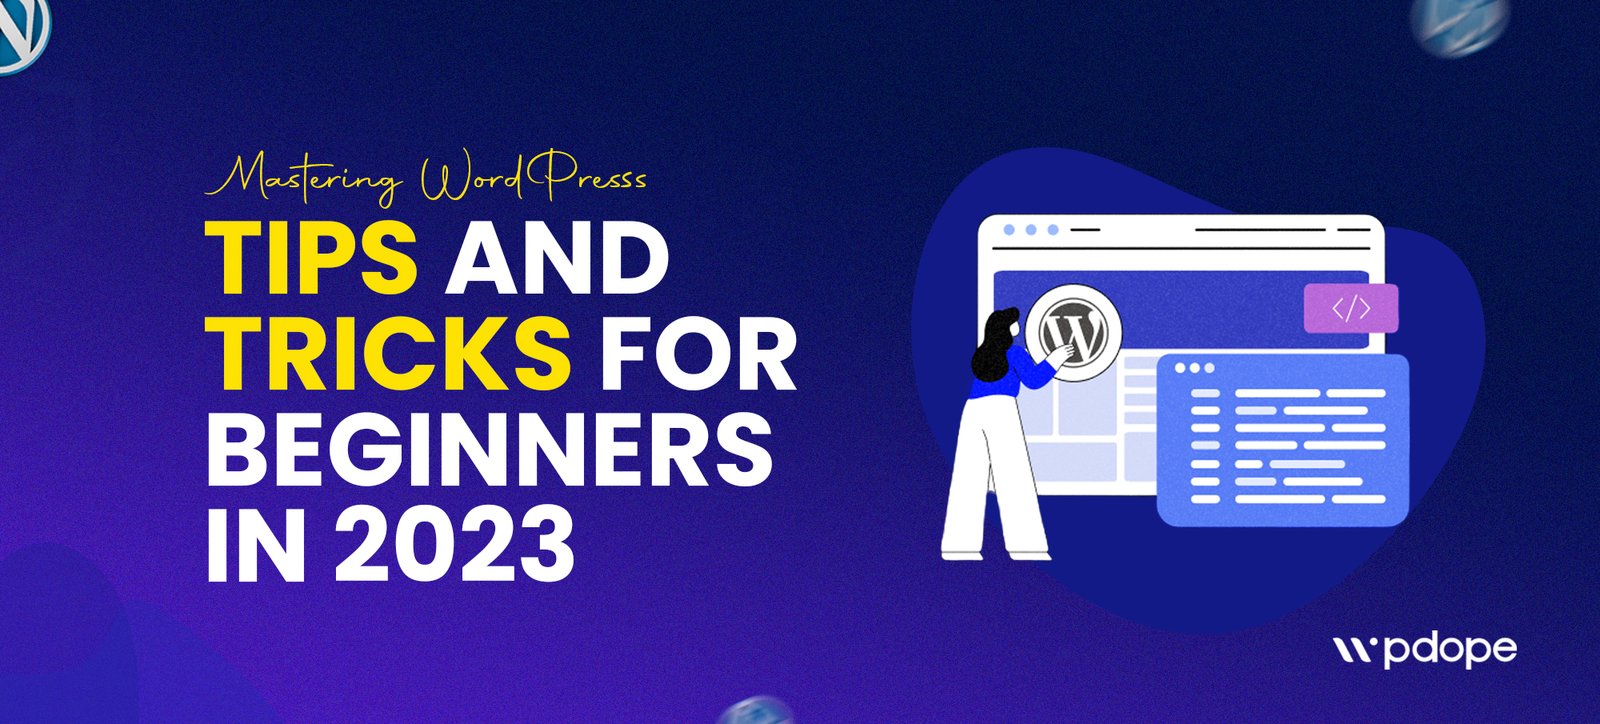 Mastering WordPress Tips and Tricks for Beginners in 2023